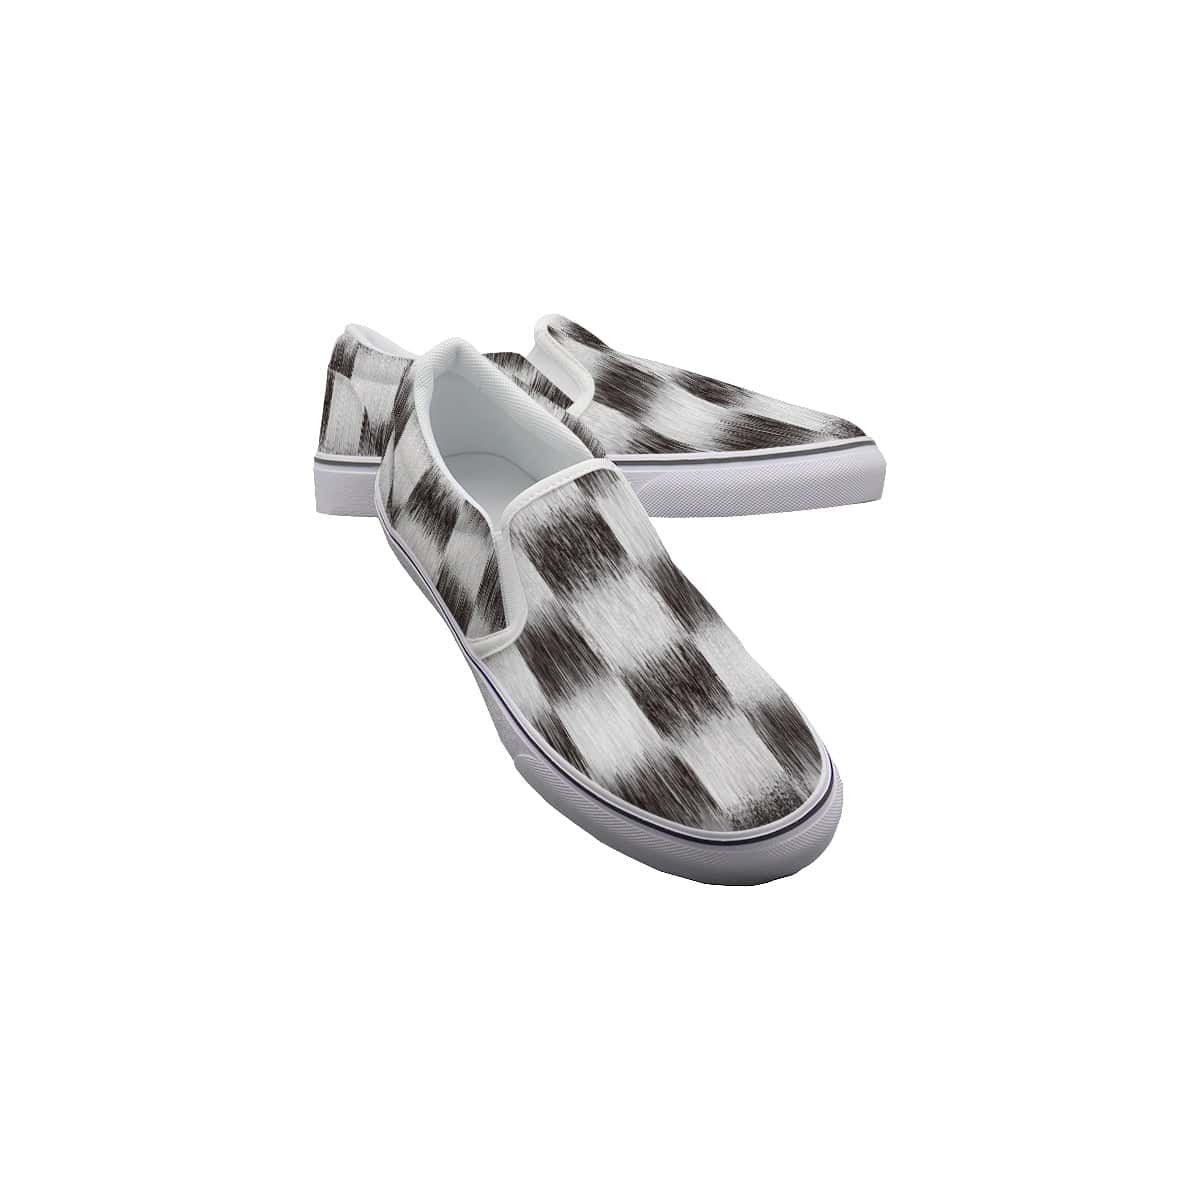 Yoycol White / US6(EUR36) Checkered Hue Hoppers - Women's Slip On Sneakers